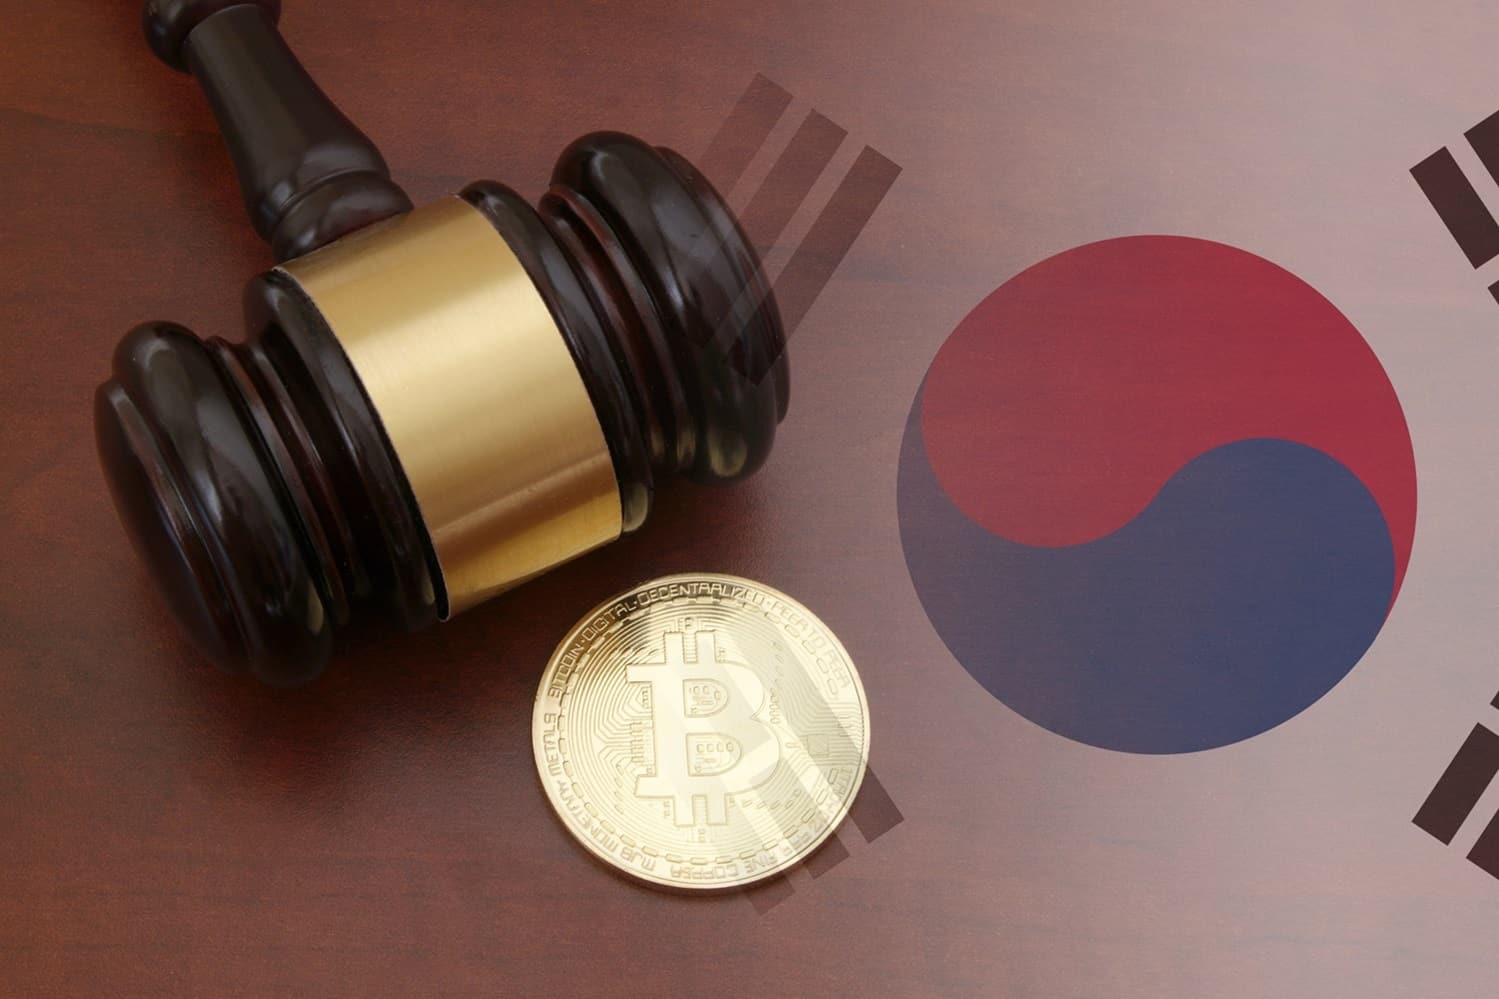 A judge’s gavel next to a metal coin intended to represent Bitcoin on a wooden table next to the South Korean flag.